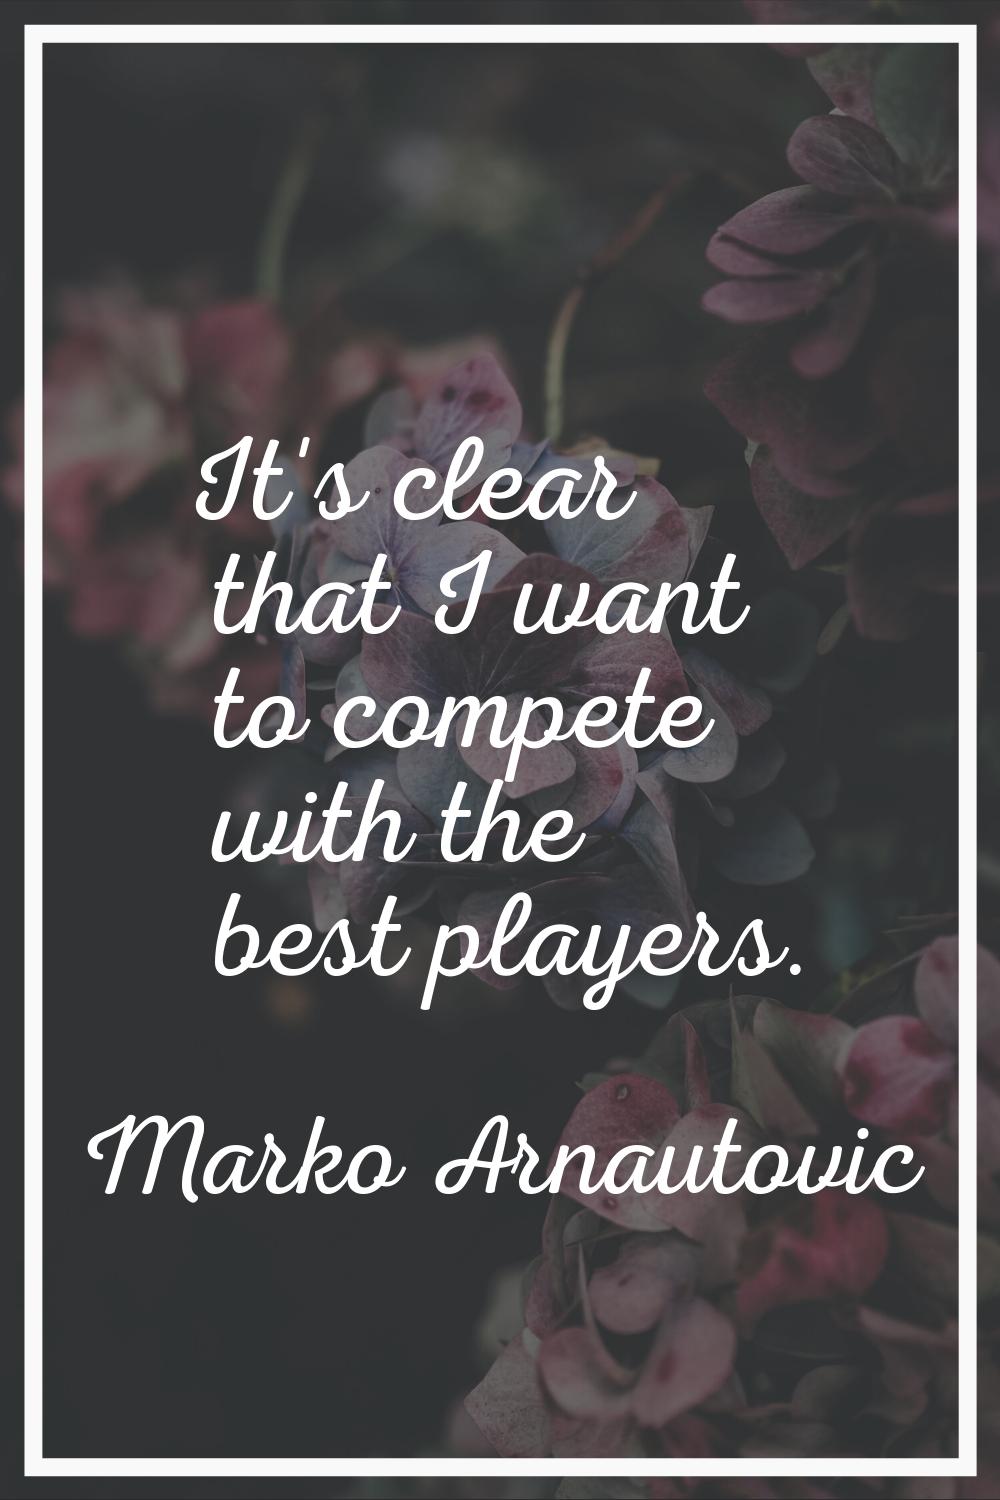 It's clear that I want to compete with the best players.